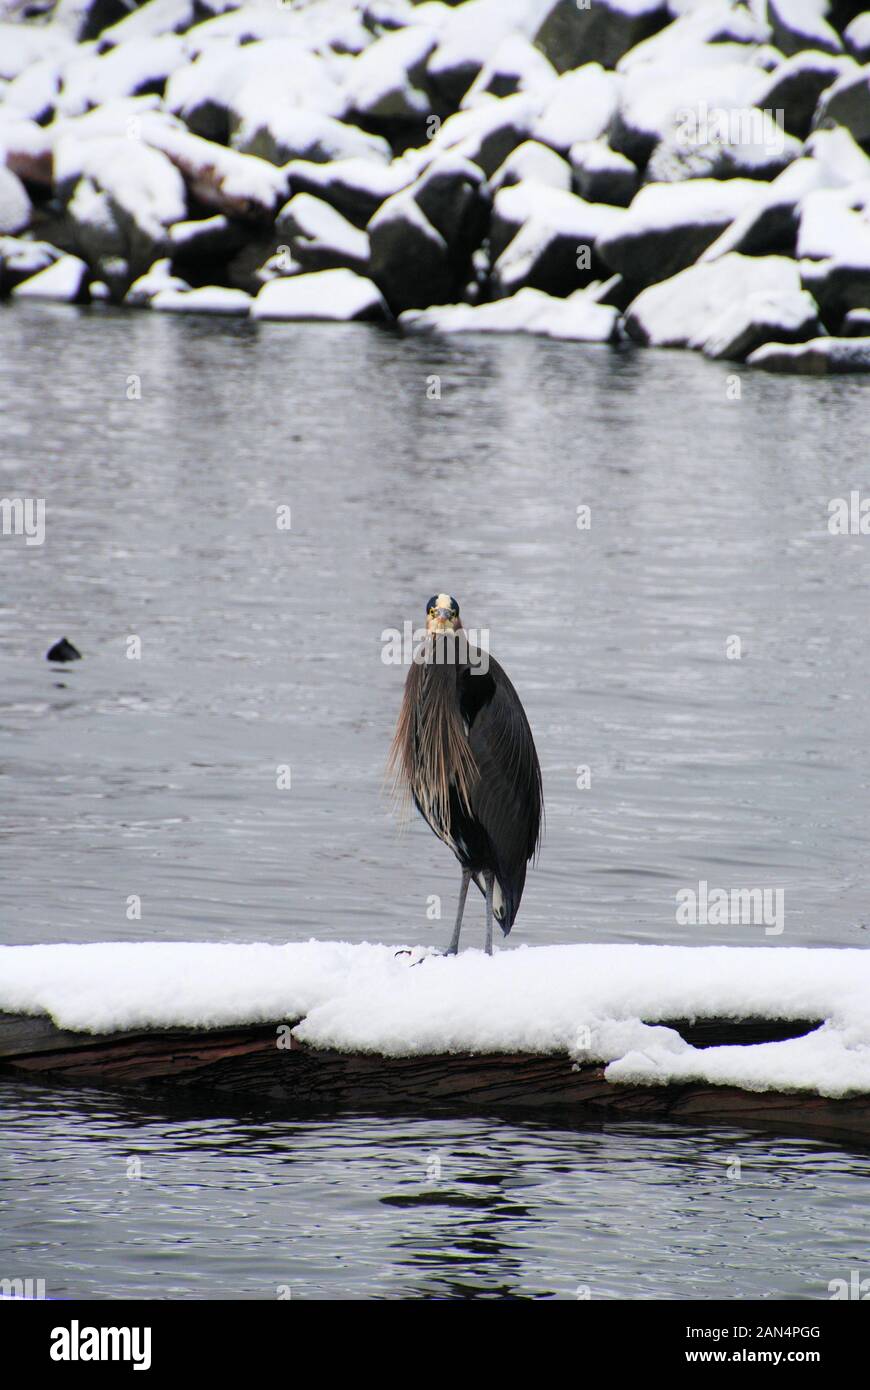 A cute great blue heron (Ardea herodias) standing and staring forward on a snowy log, in a white winter sea landscape, in Canada Stock Photo